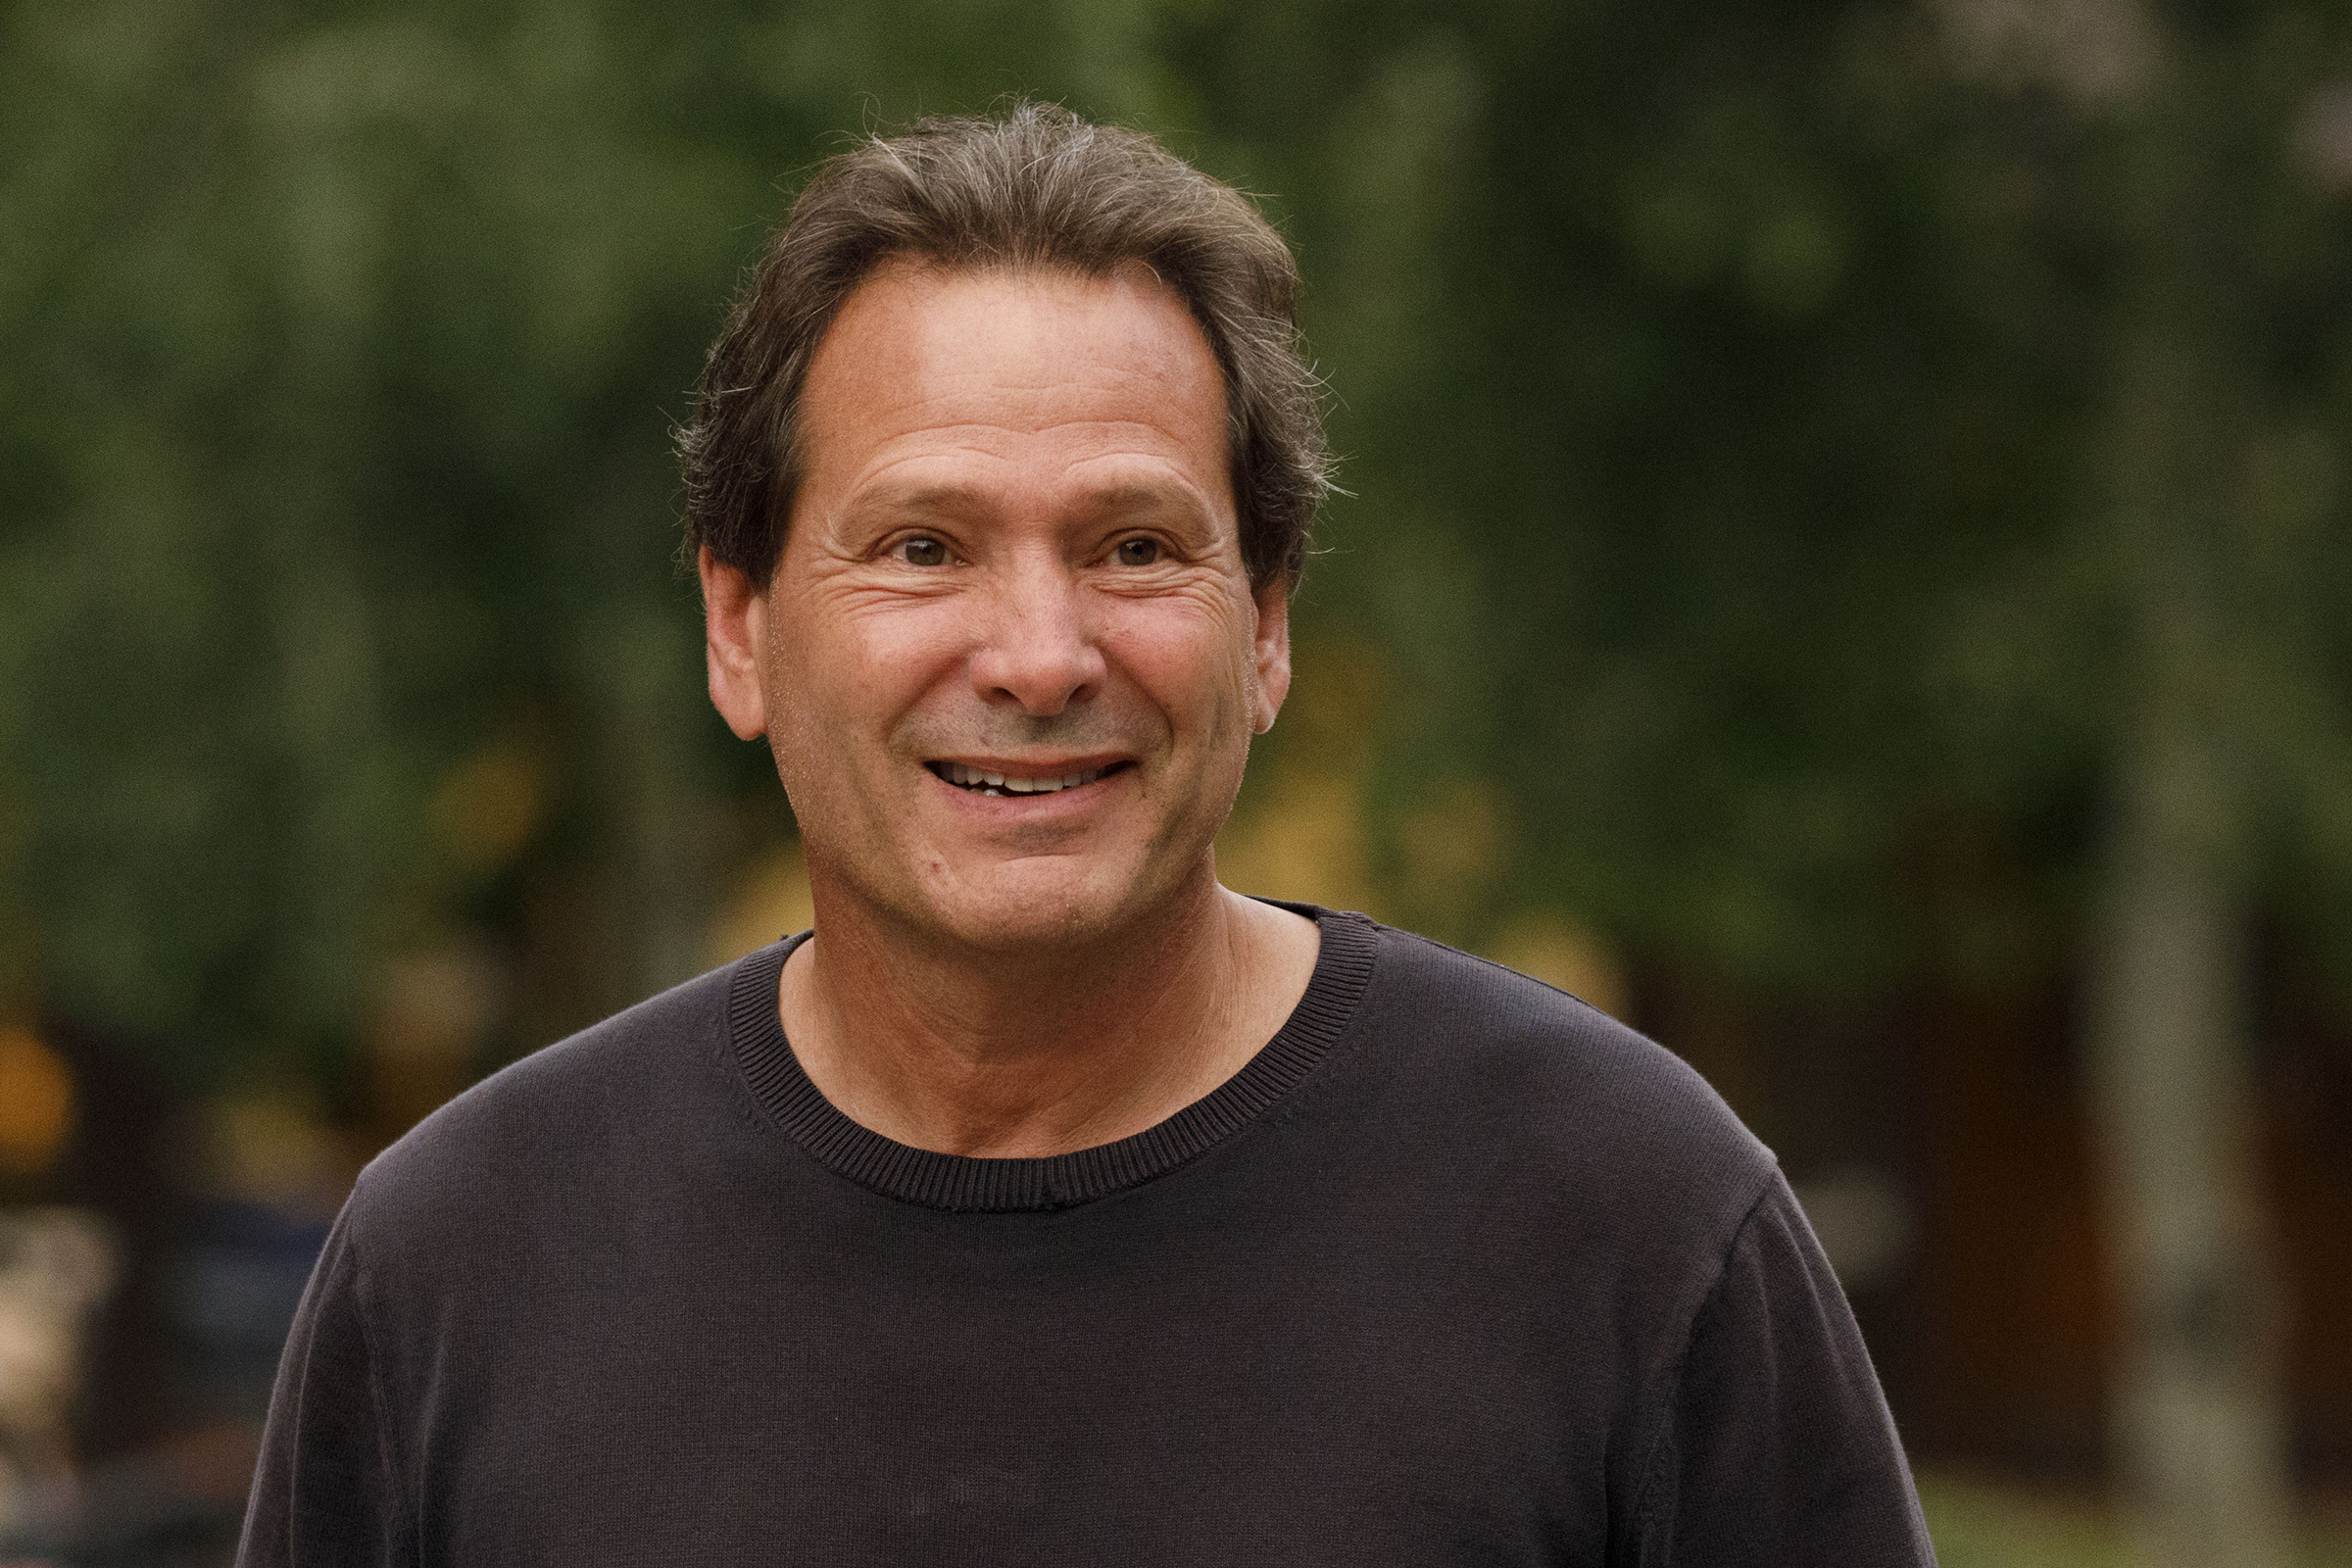 Dan Schulman, president and chief executive officer of PayPal Holdings Inc., arrives for the morning session of the Allen &amp; Co. Media and Technology Conference in Sun Valley, Idaho, U.S., on Wednesday, July 10, 2019. (Patrick T. Fallon/Bloomberg via Getty Images)